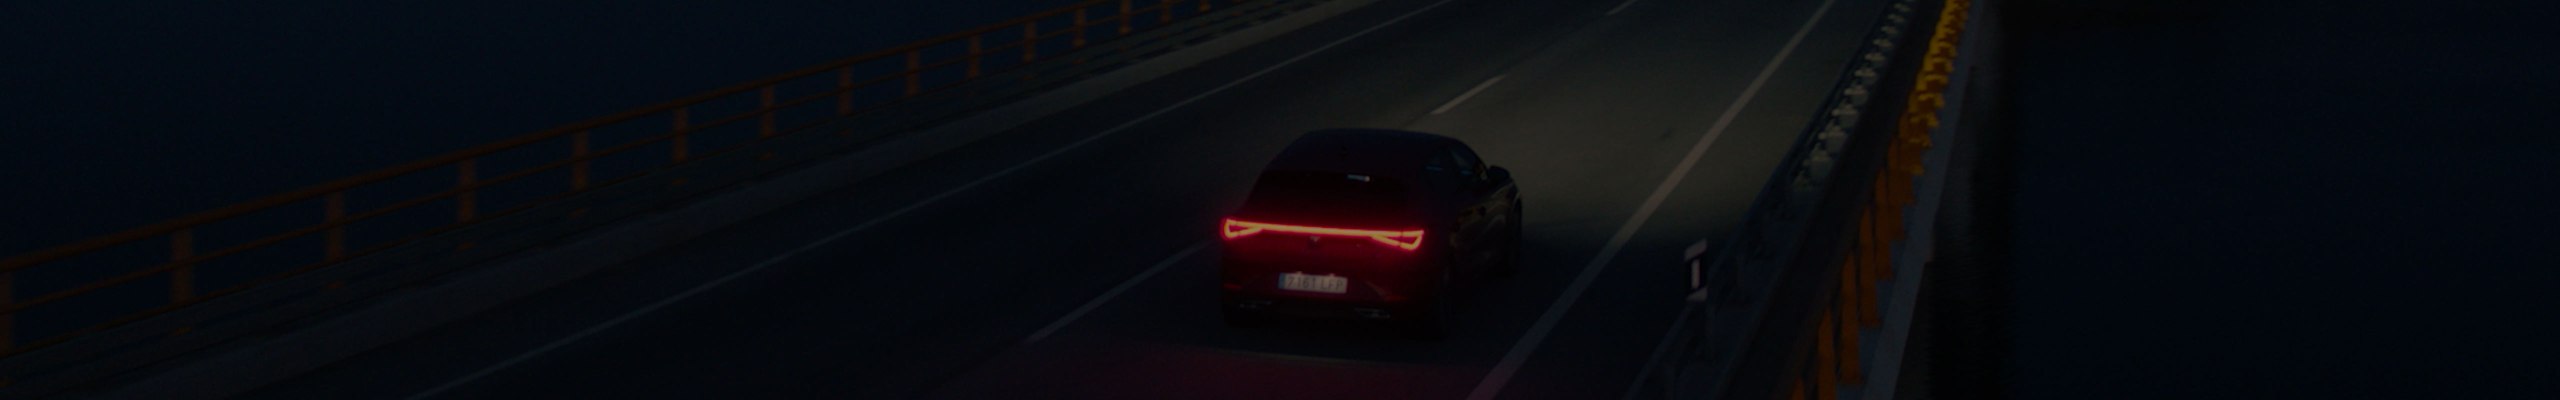 800 hours in pitch darkness to test the lights of the SEAT Leon.